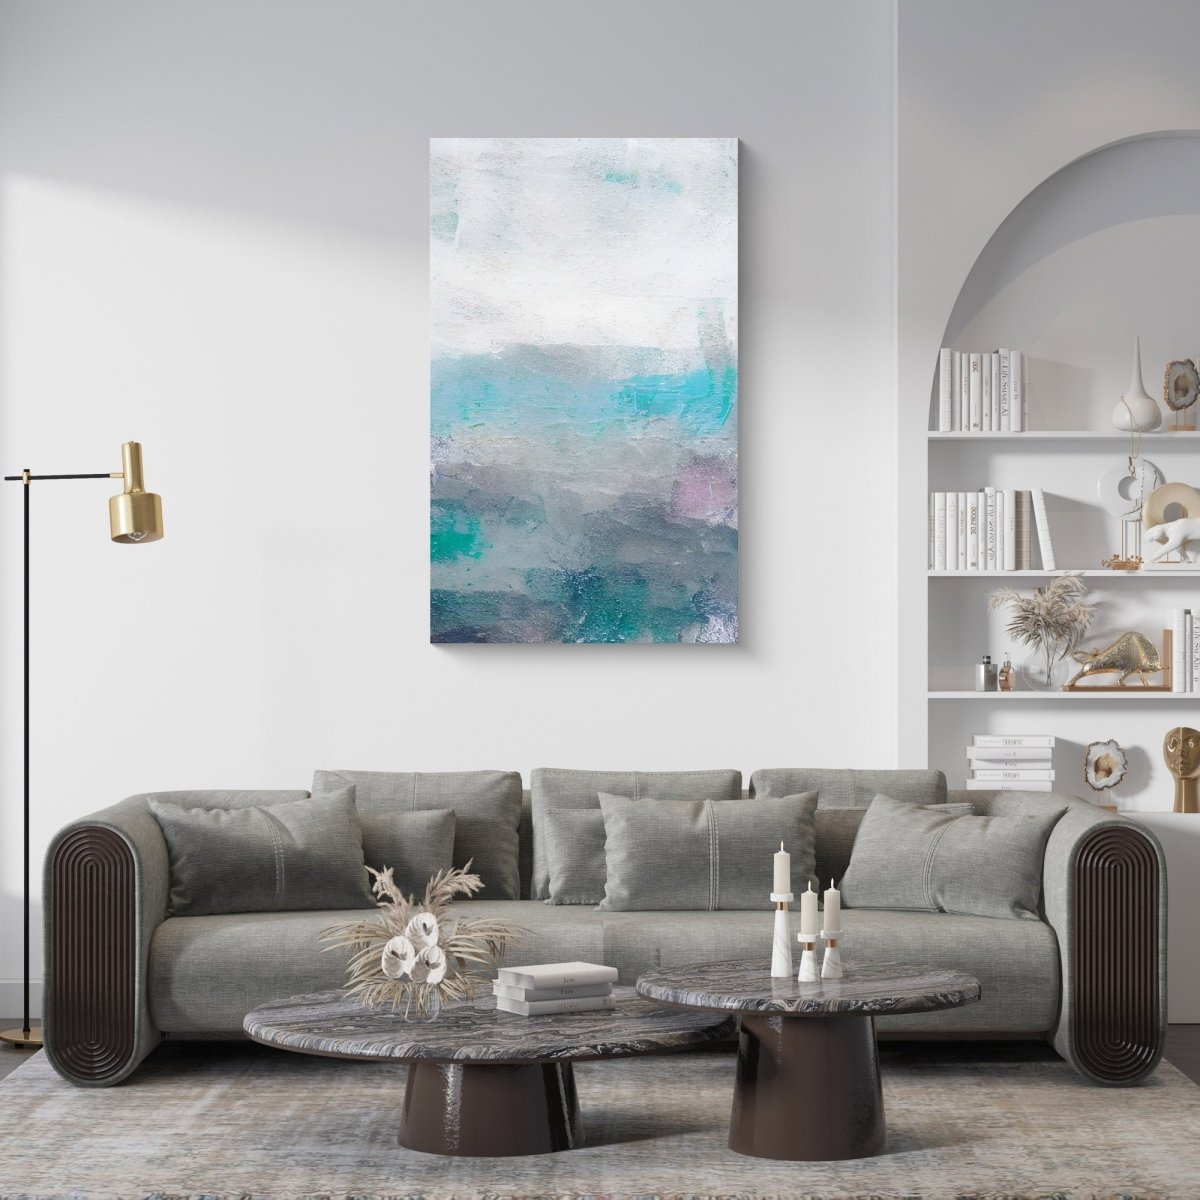 Hues of Grey and White Abstract- Gallery Twelve